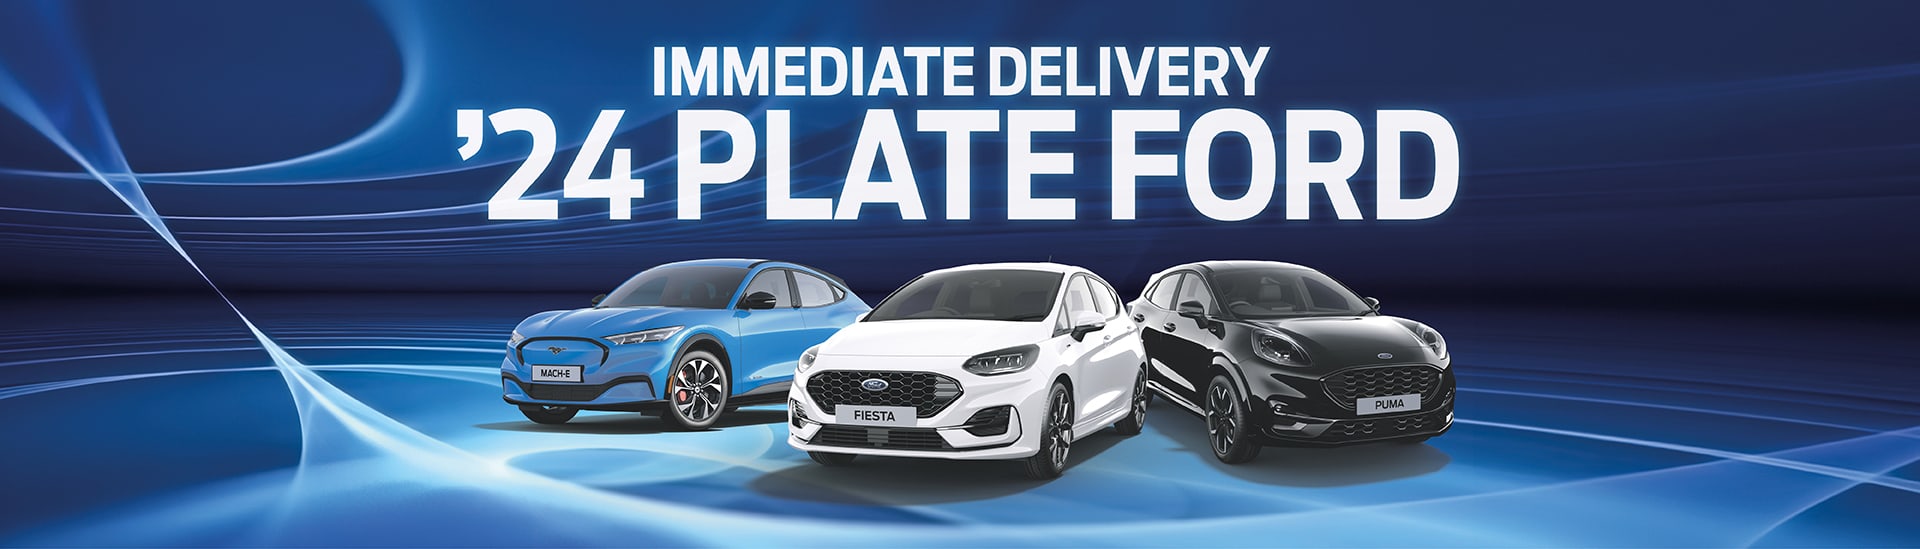 Ford Immediate Delivery Offers at Marshall Ford